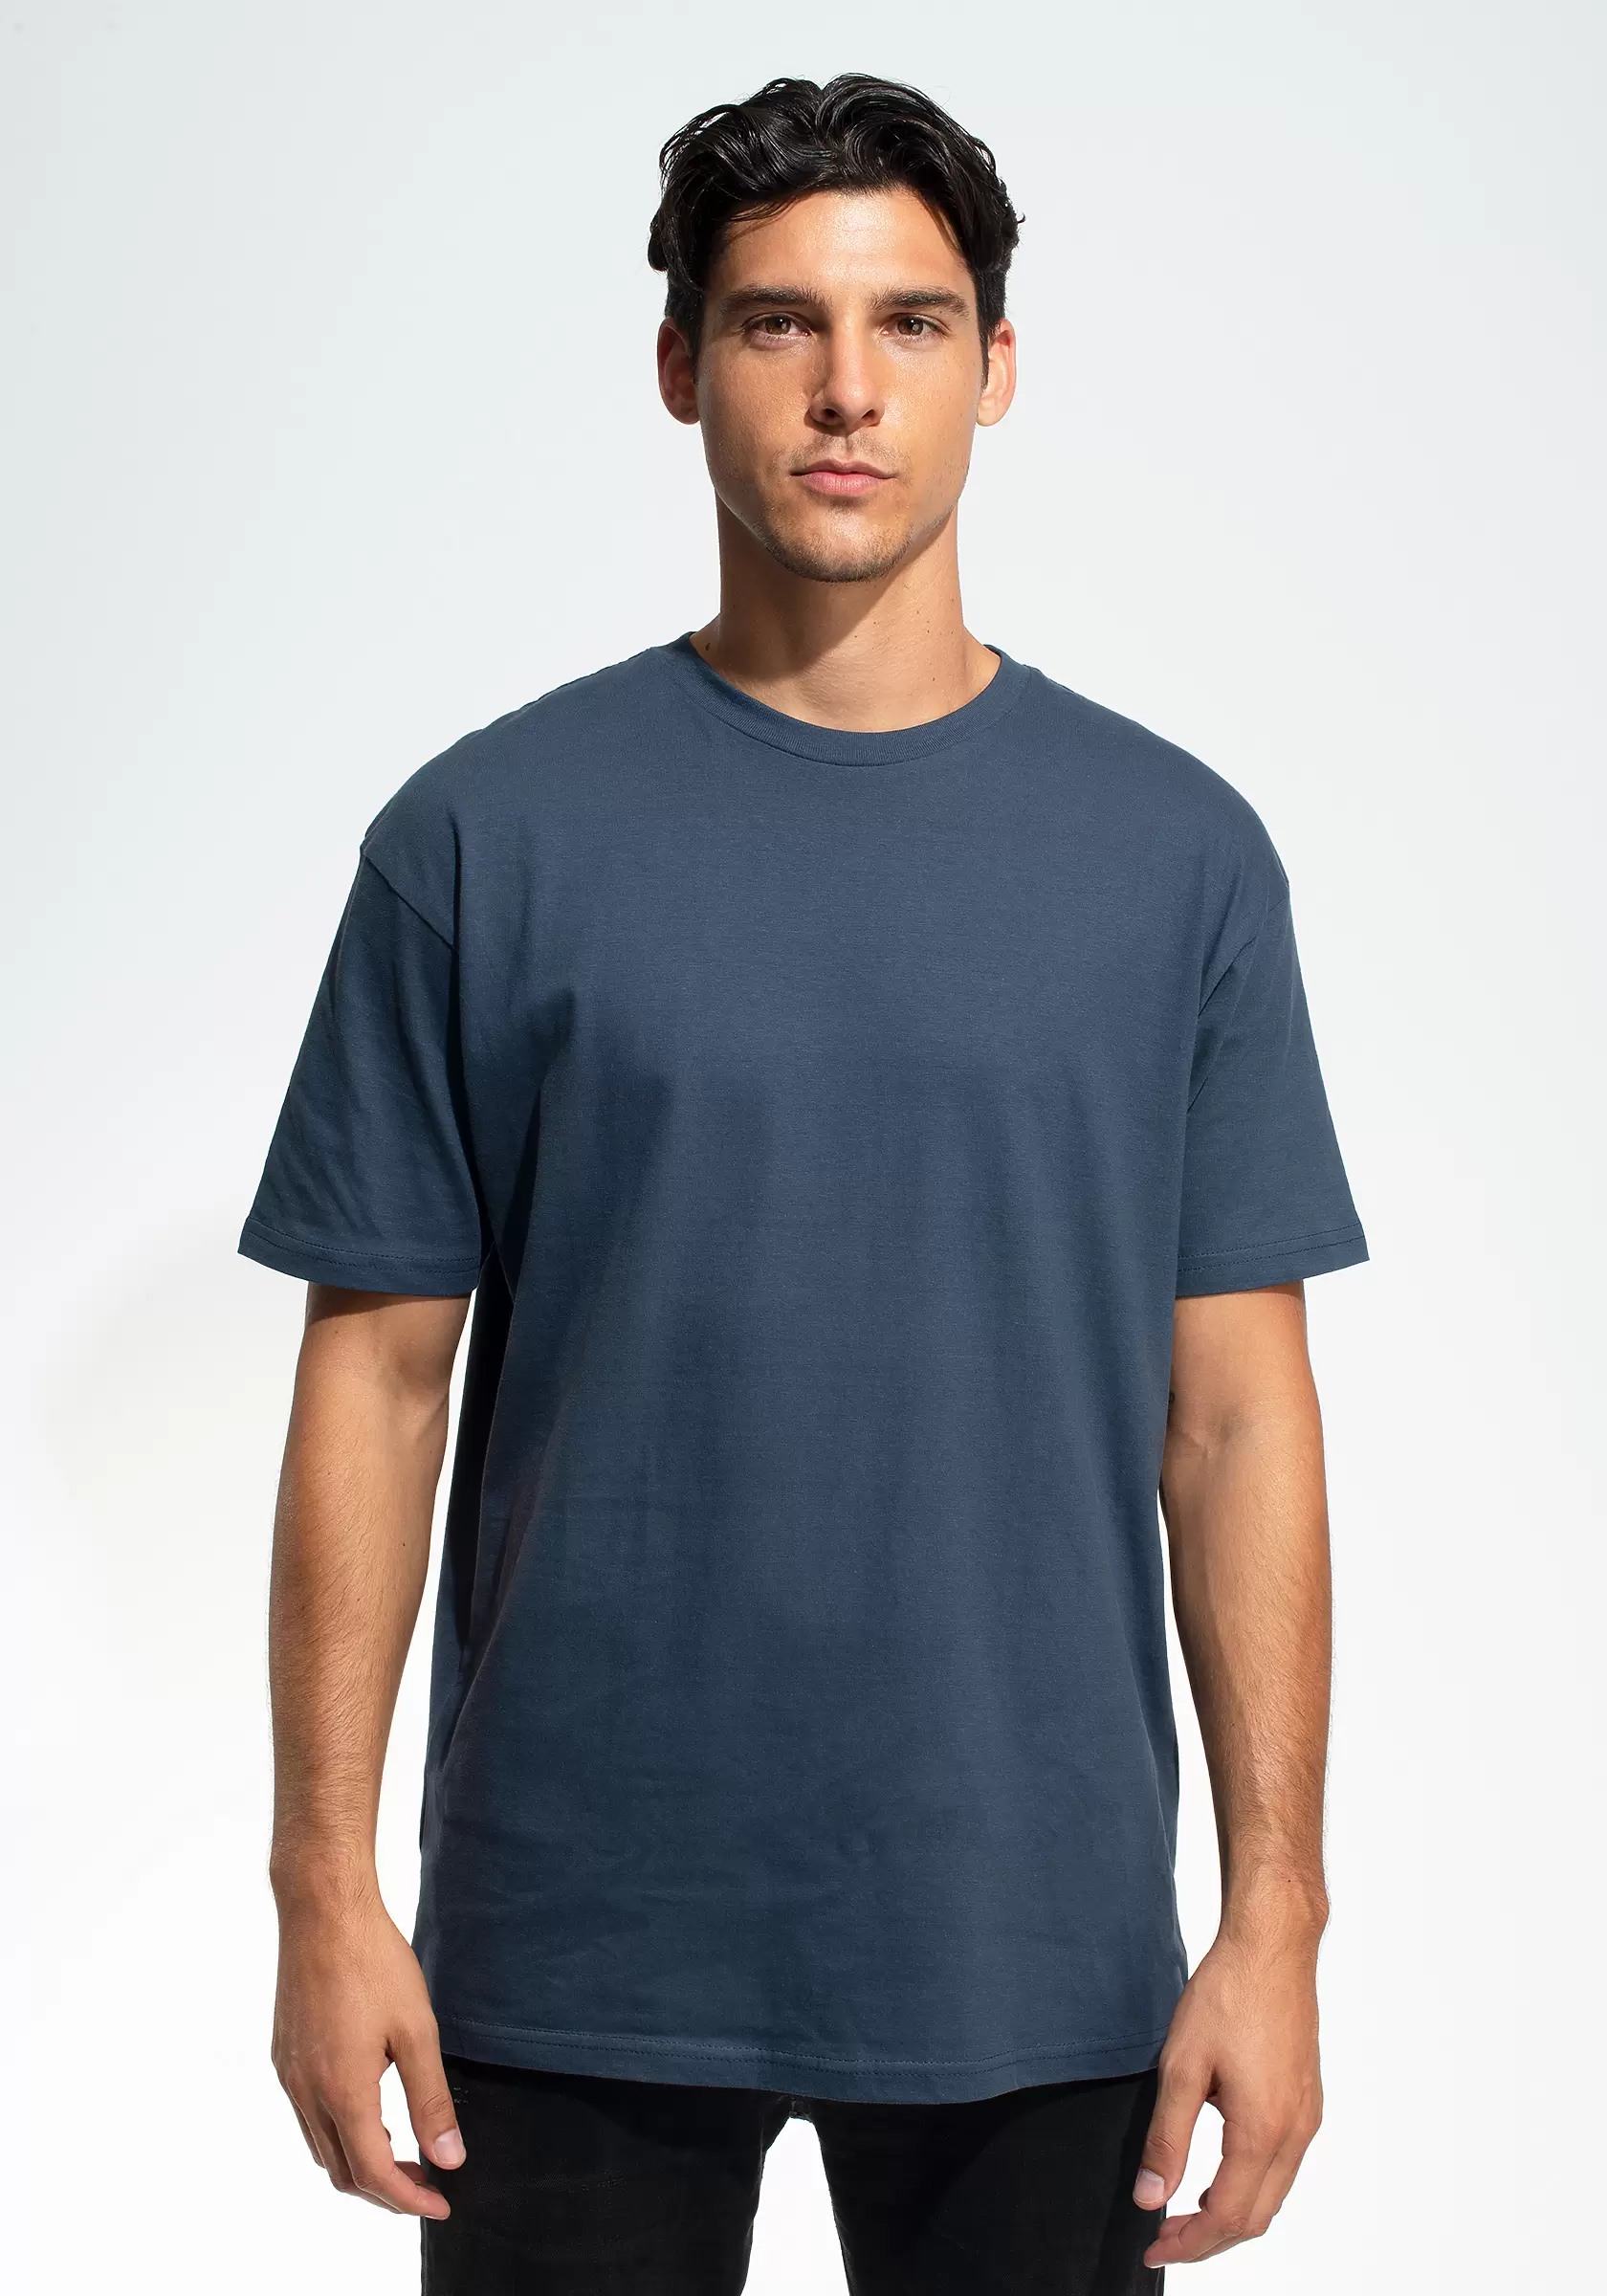 Cotton Heritage MC1086 T Shirt | Wholesale Bulk Pricing - From $6.28